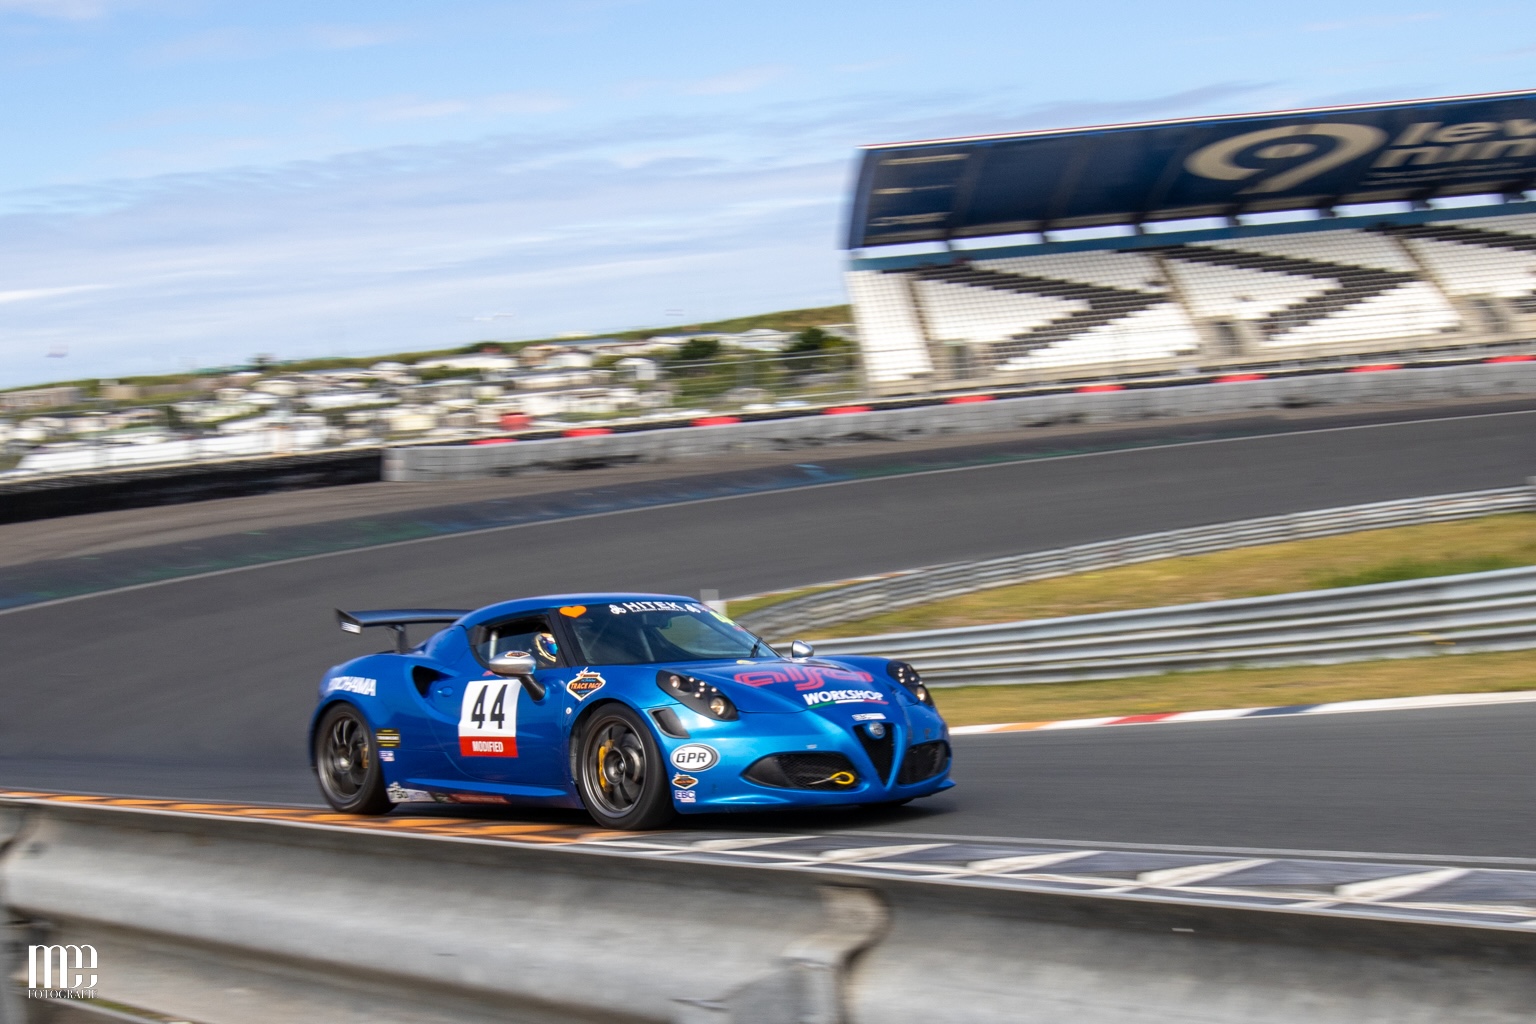 Zandvoort - 2nd on the road, 3rd in the results